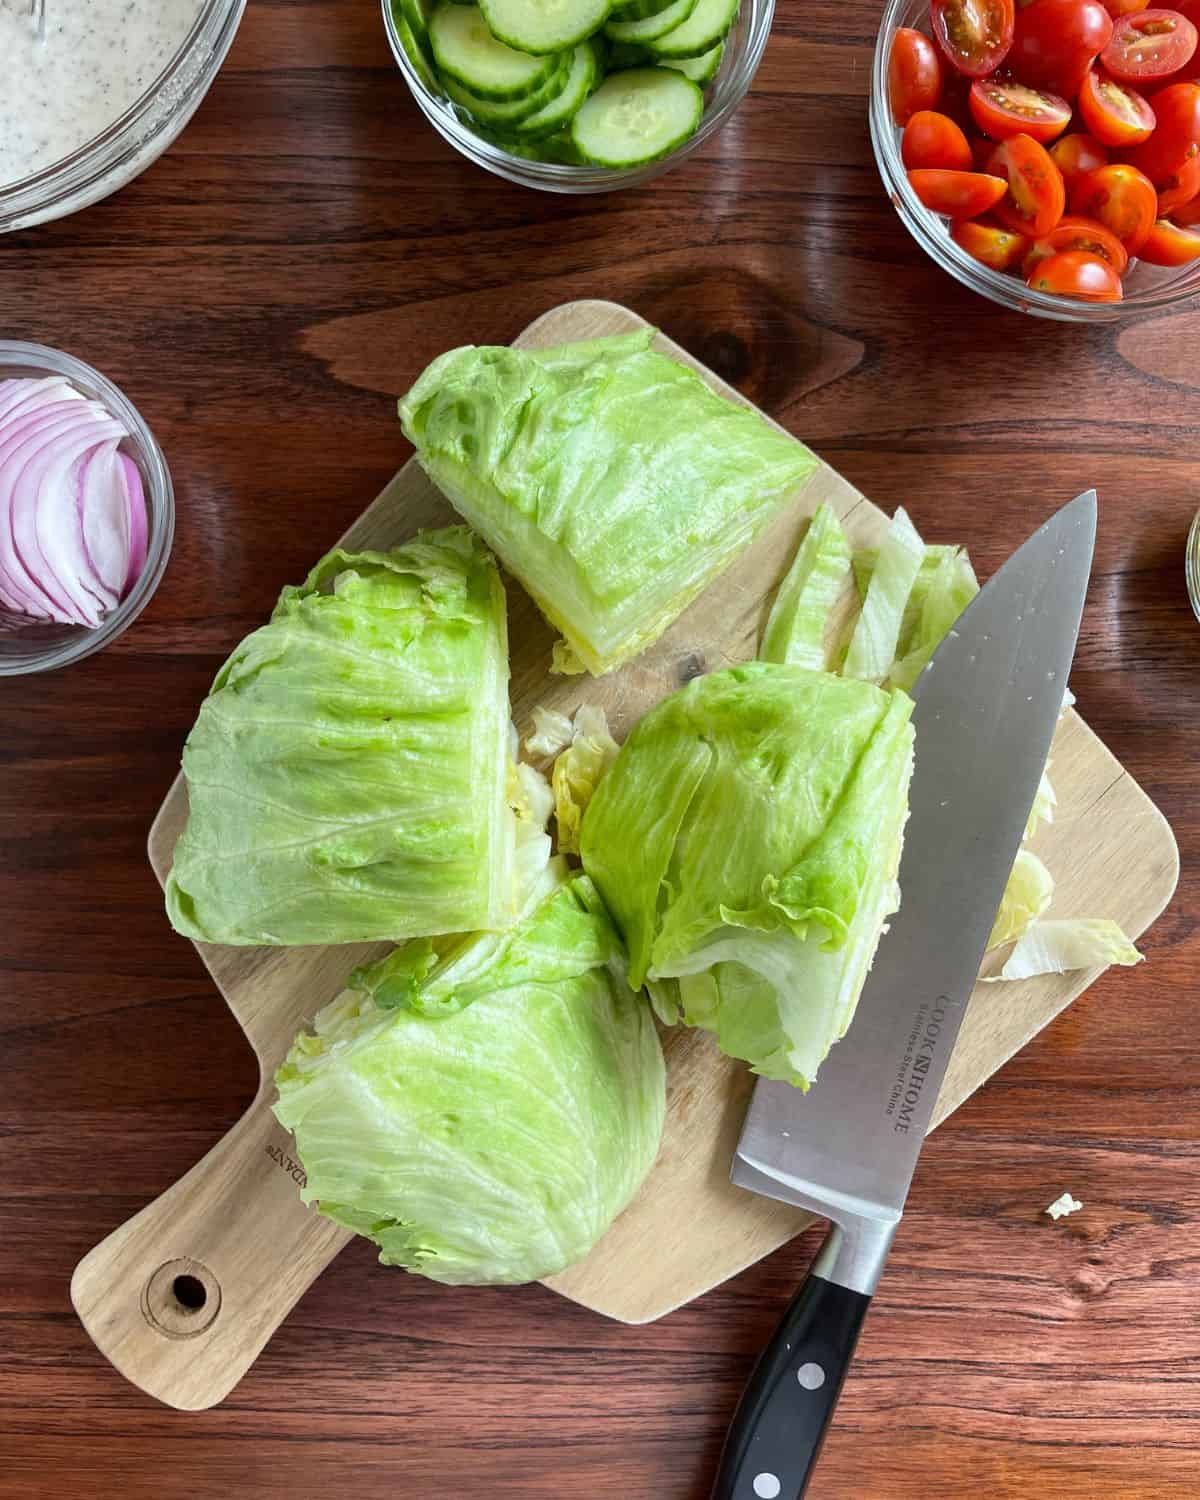 Iceberg lettuce chopped into wedges, with a knife and various vegetables.